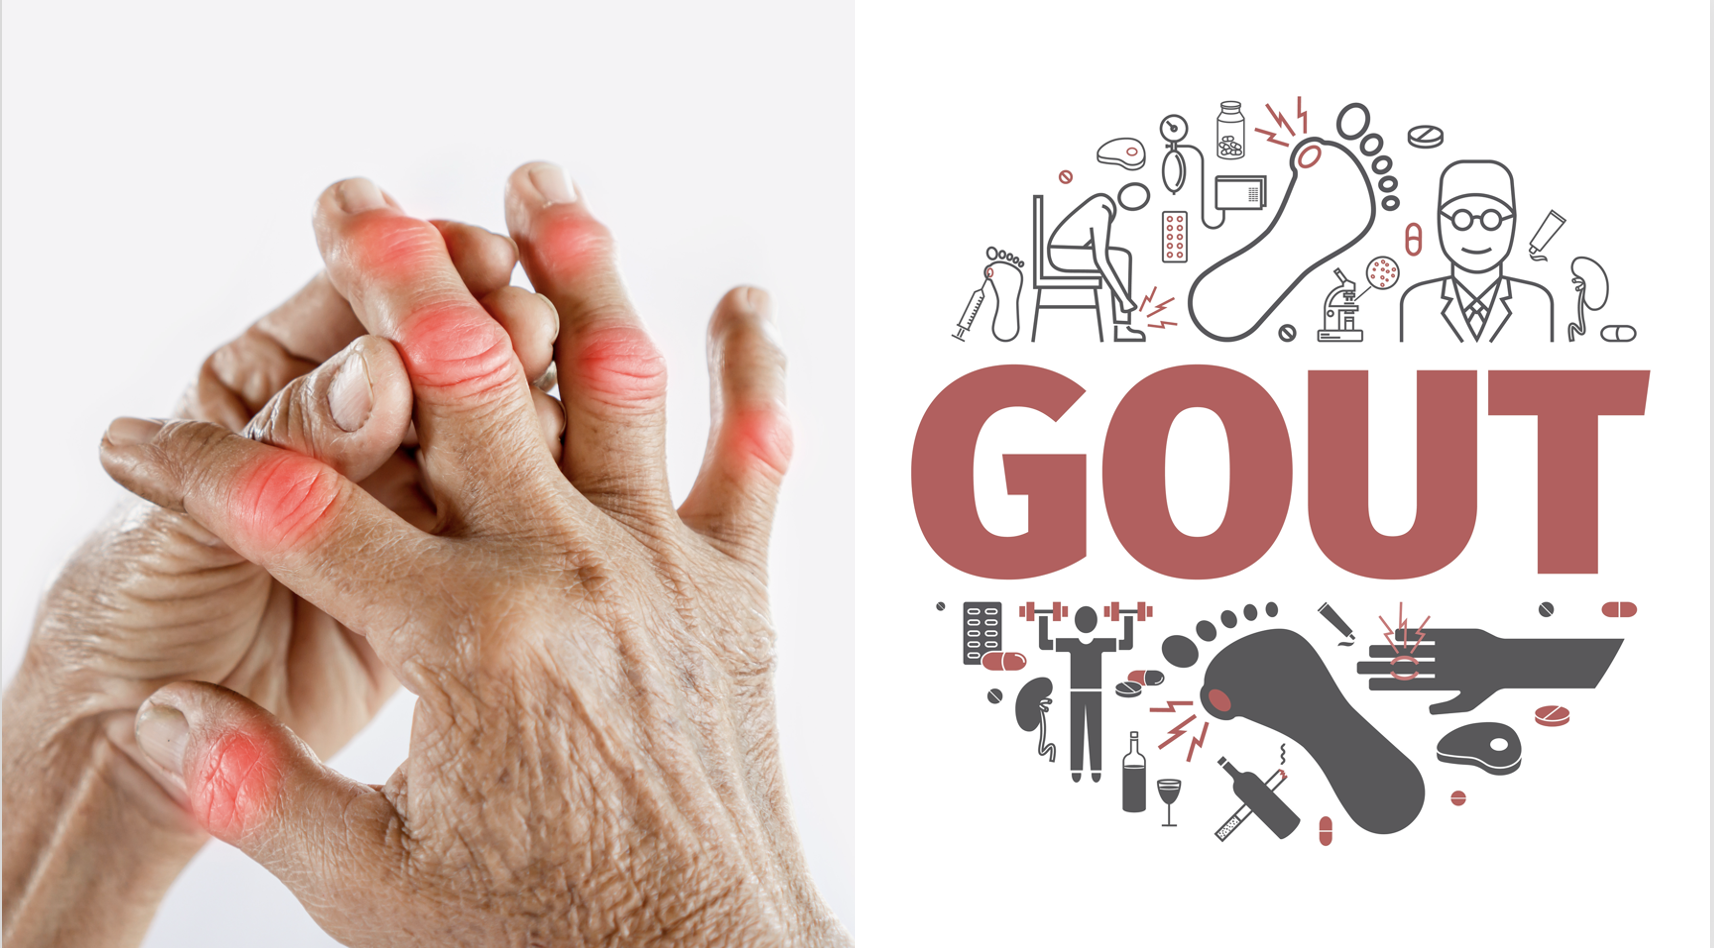 Combination Methotrexate and Pegloticase Therapy Proven More Effective Than Monotherapy in Patients With Gout